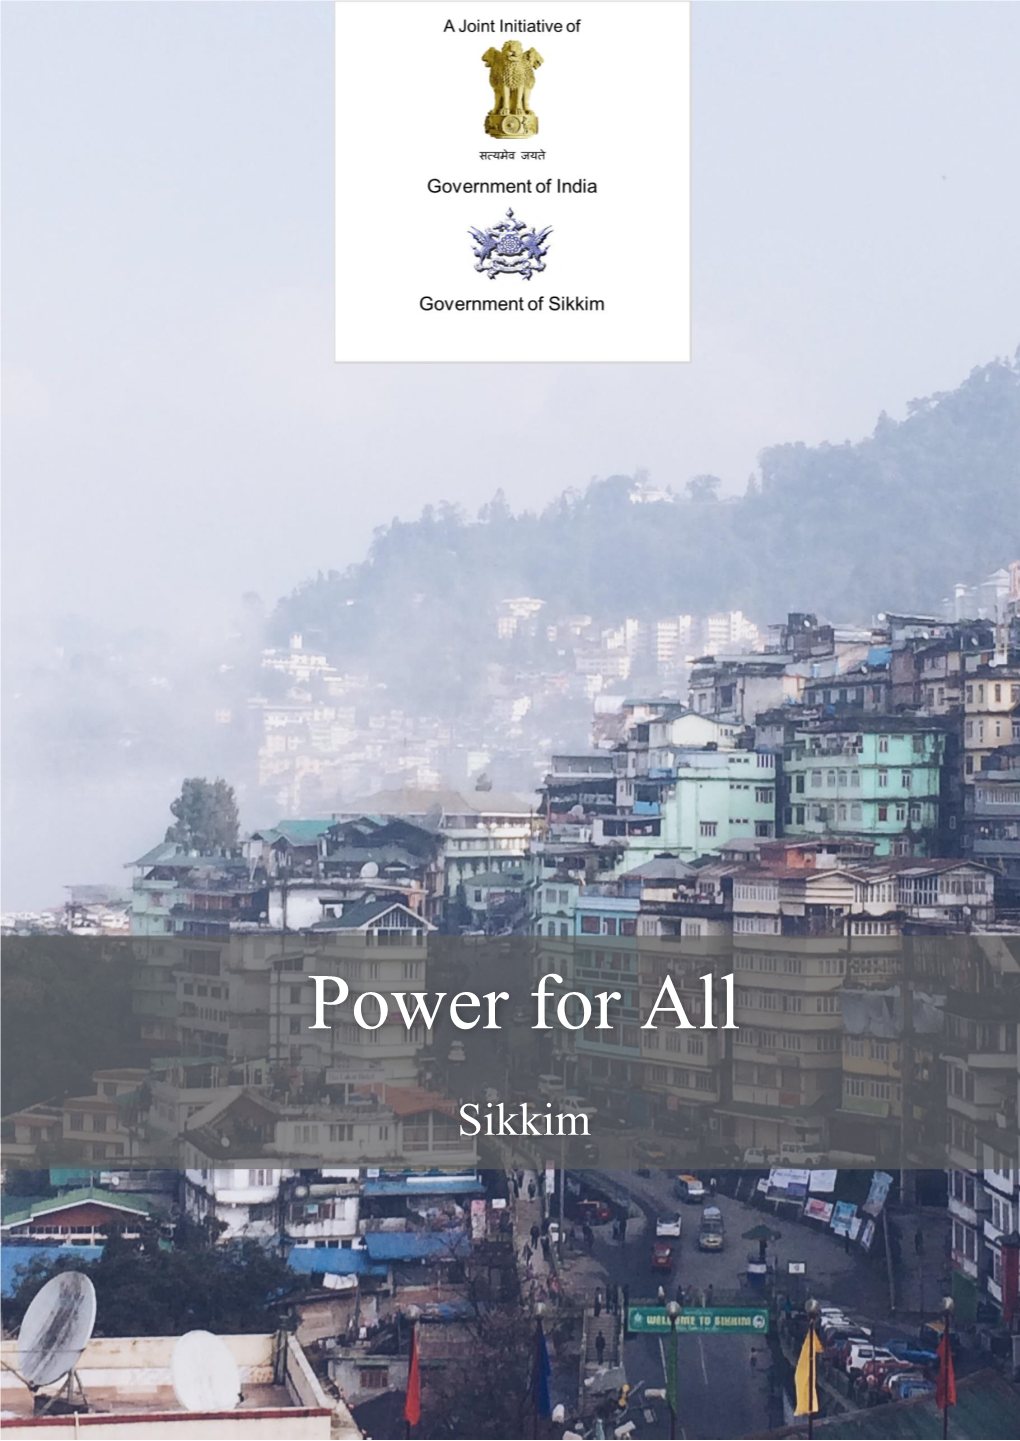 A Joint Initiative of Government of India and Government of Sikkim